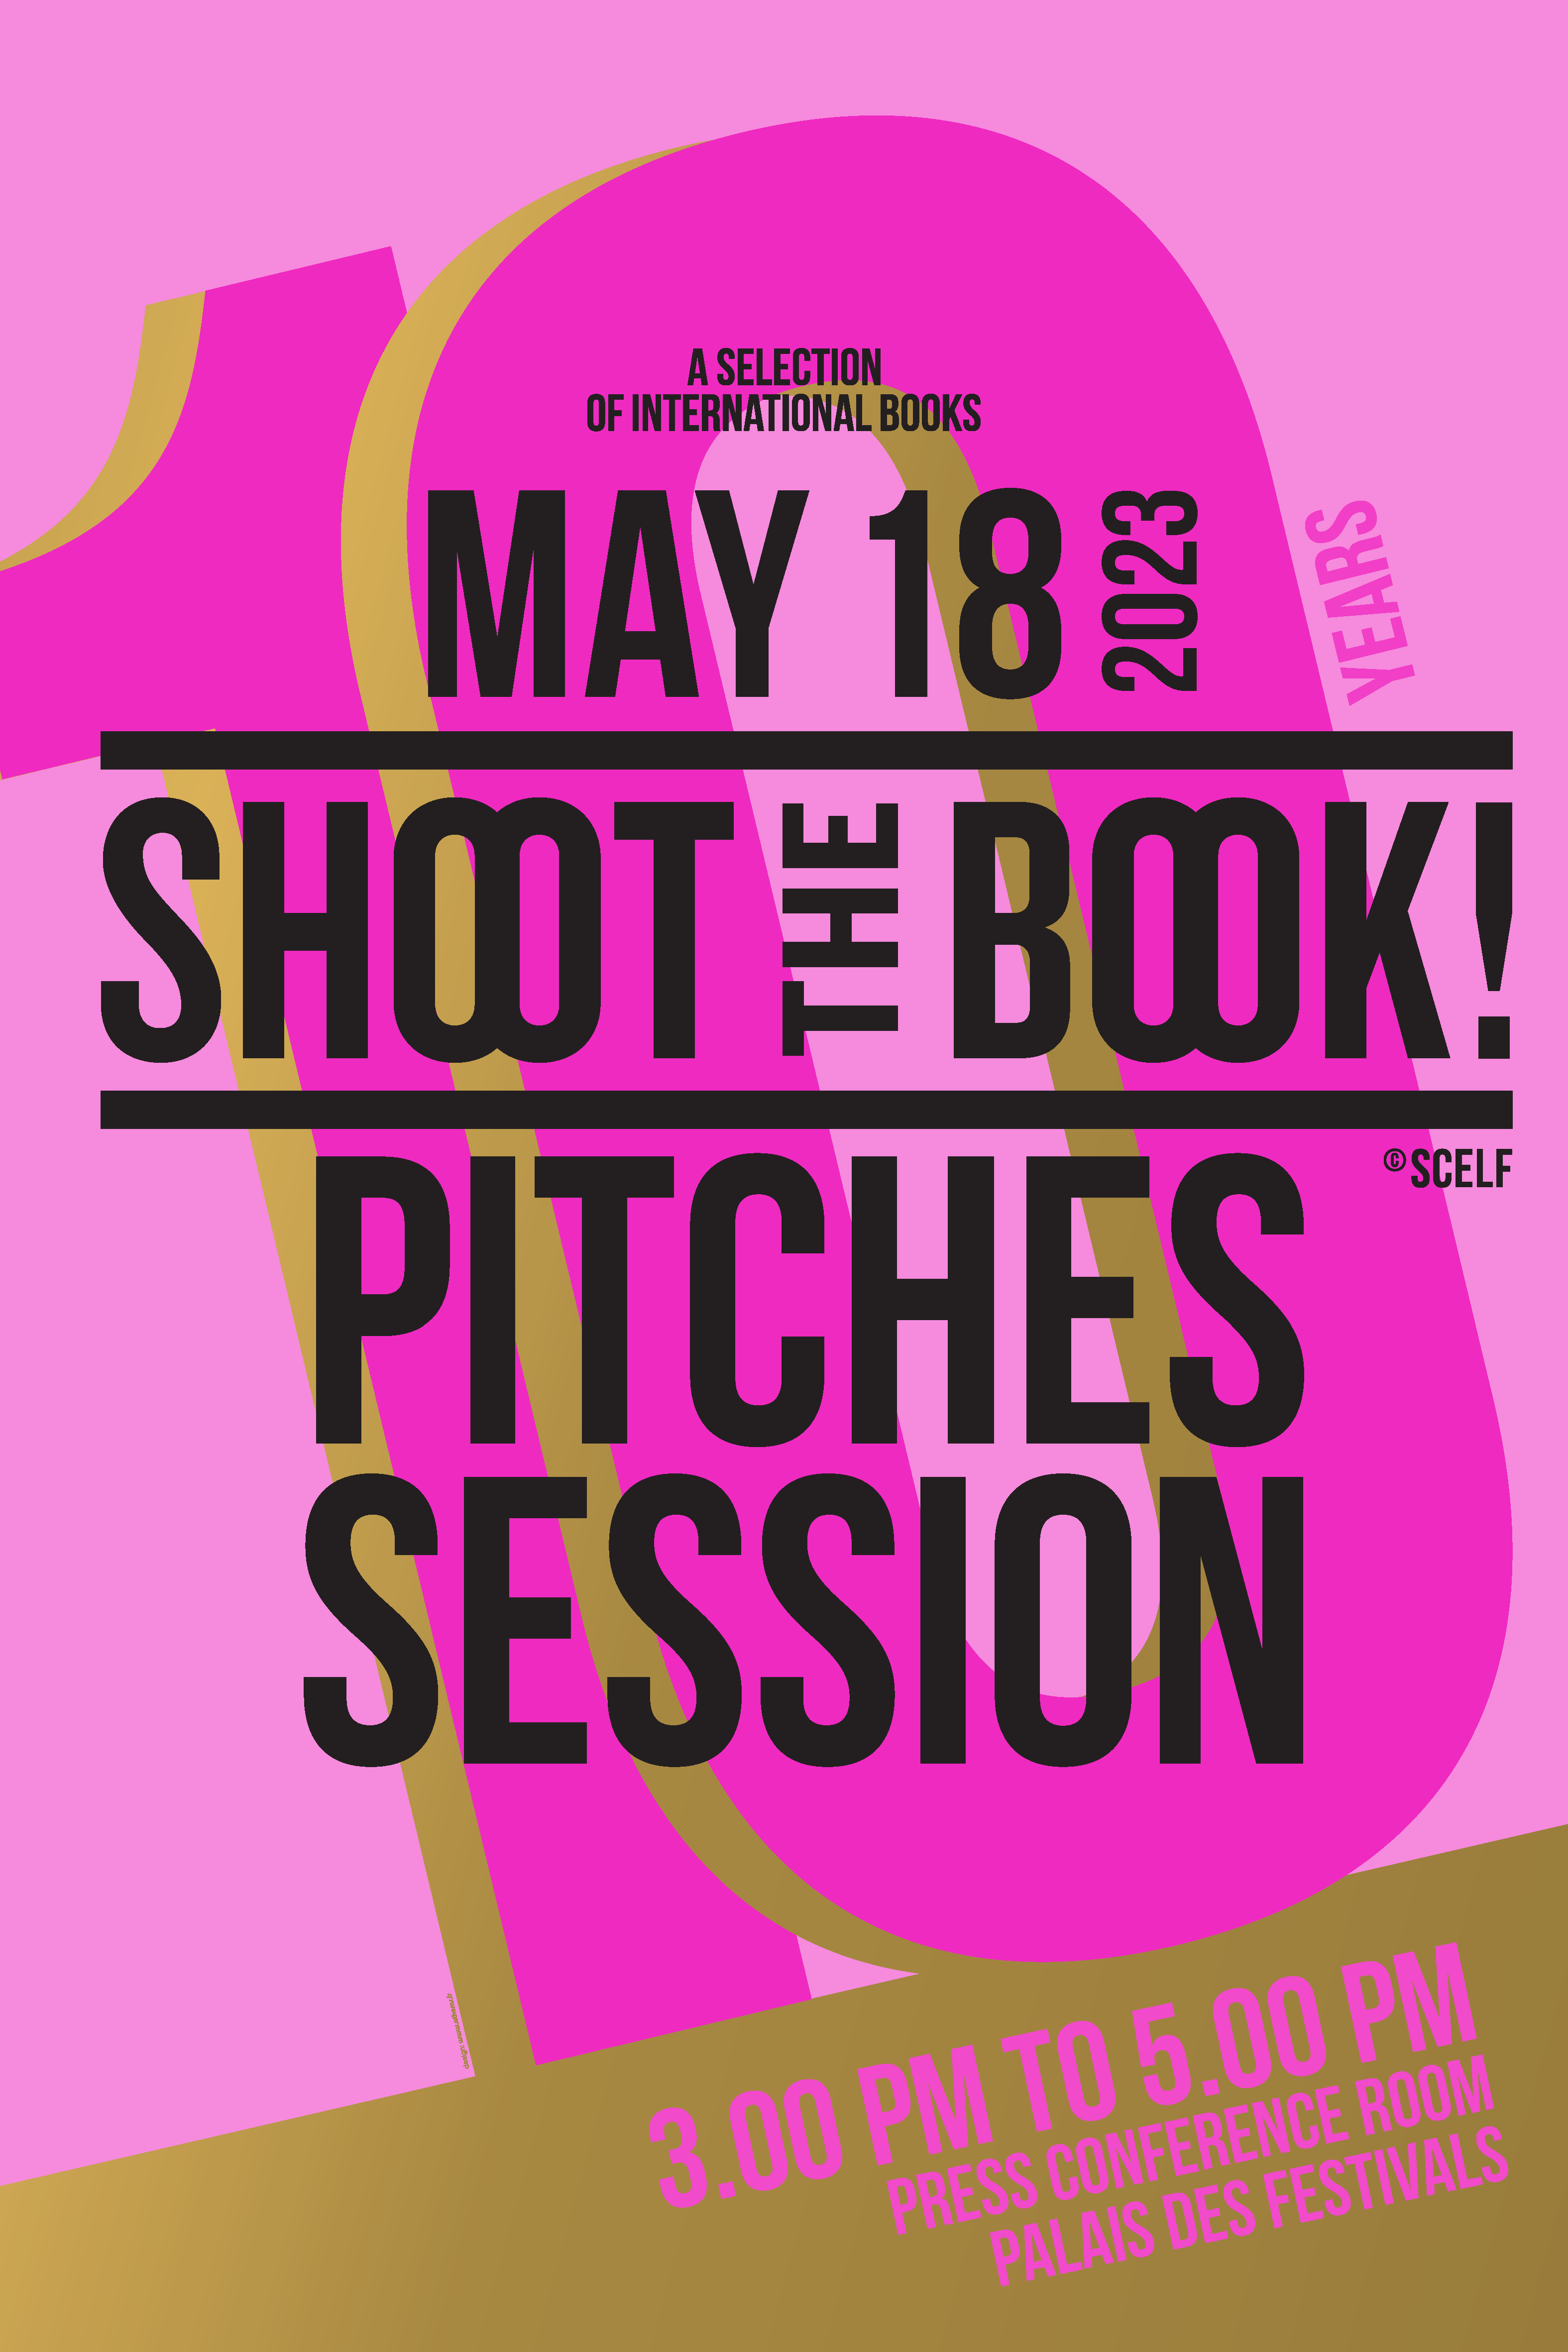 Shoot the book! Cannes Pitches Session